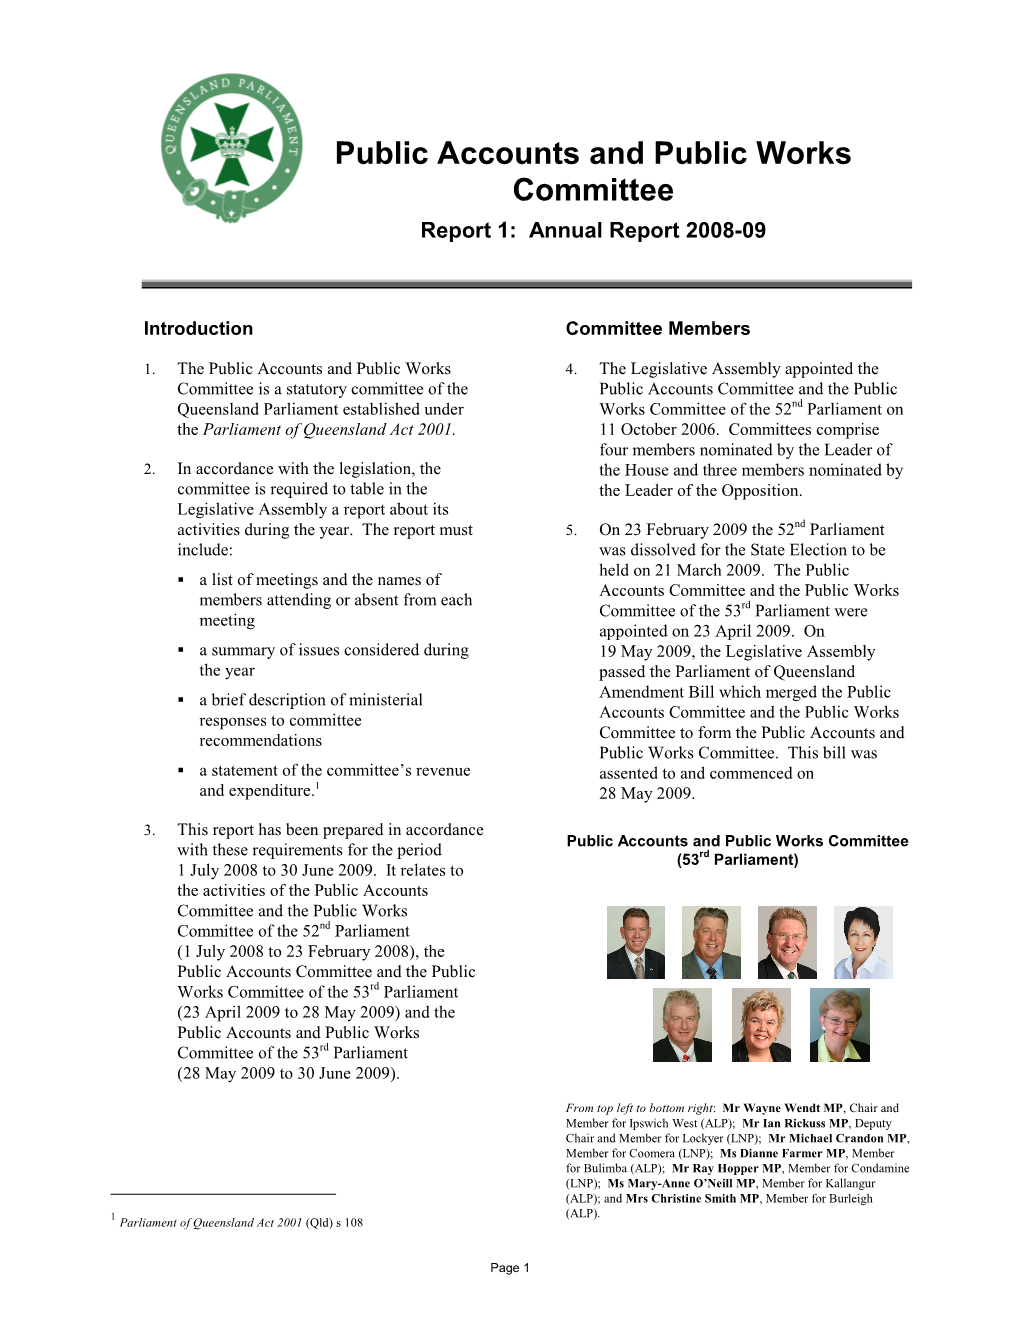 Public Accounts and Public Works Committee Report 1: Annual Report 2008-09